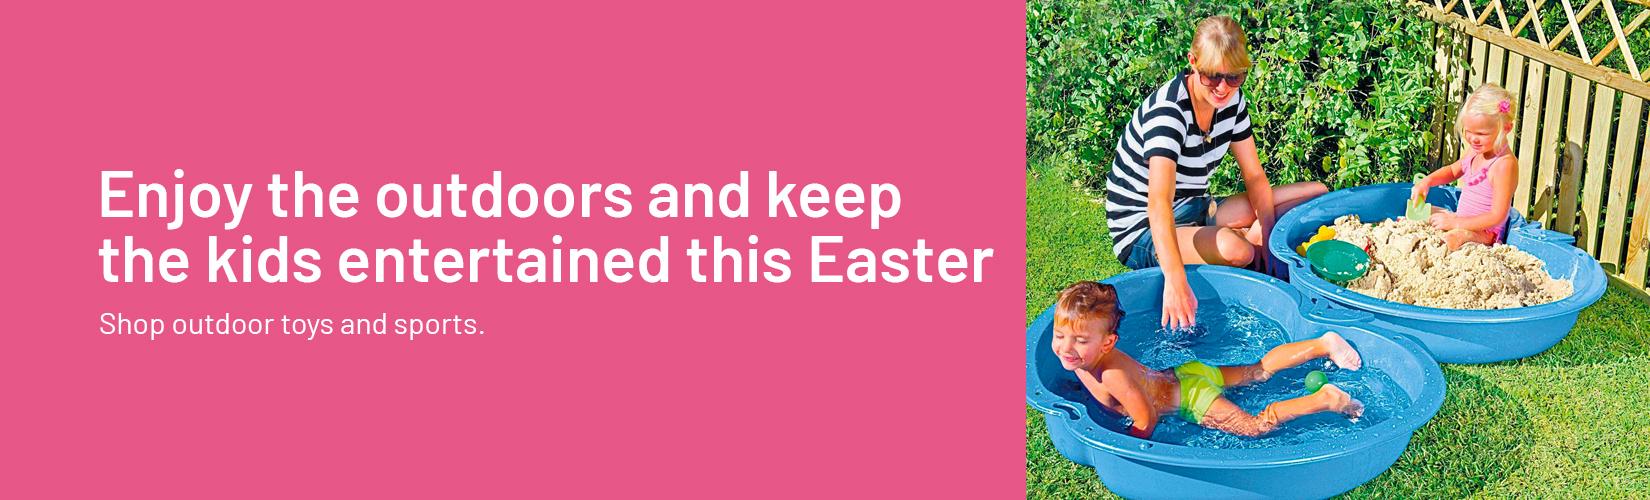 Enjoy the outdoors and keep the kids entertained this Easter. Shop outdoor toys and sports.